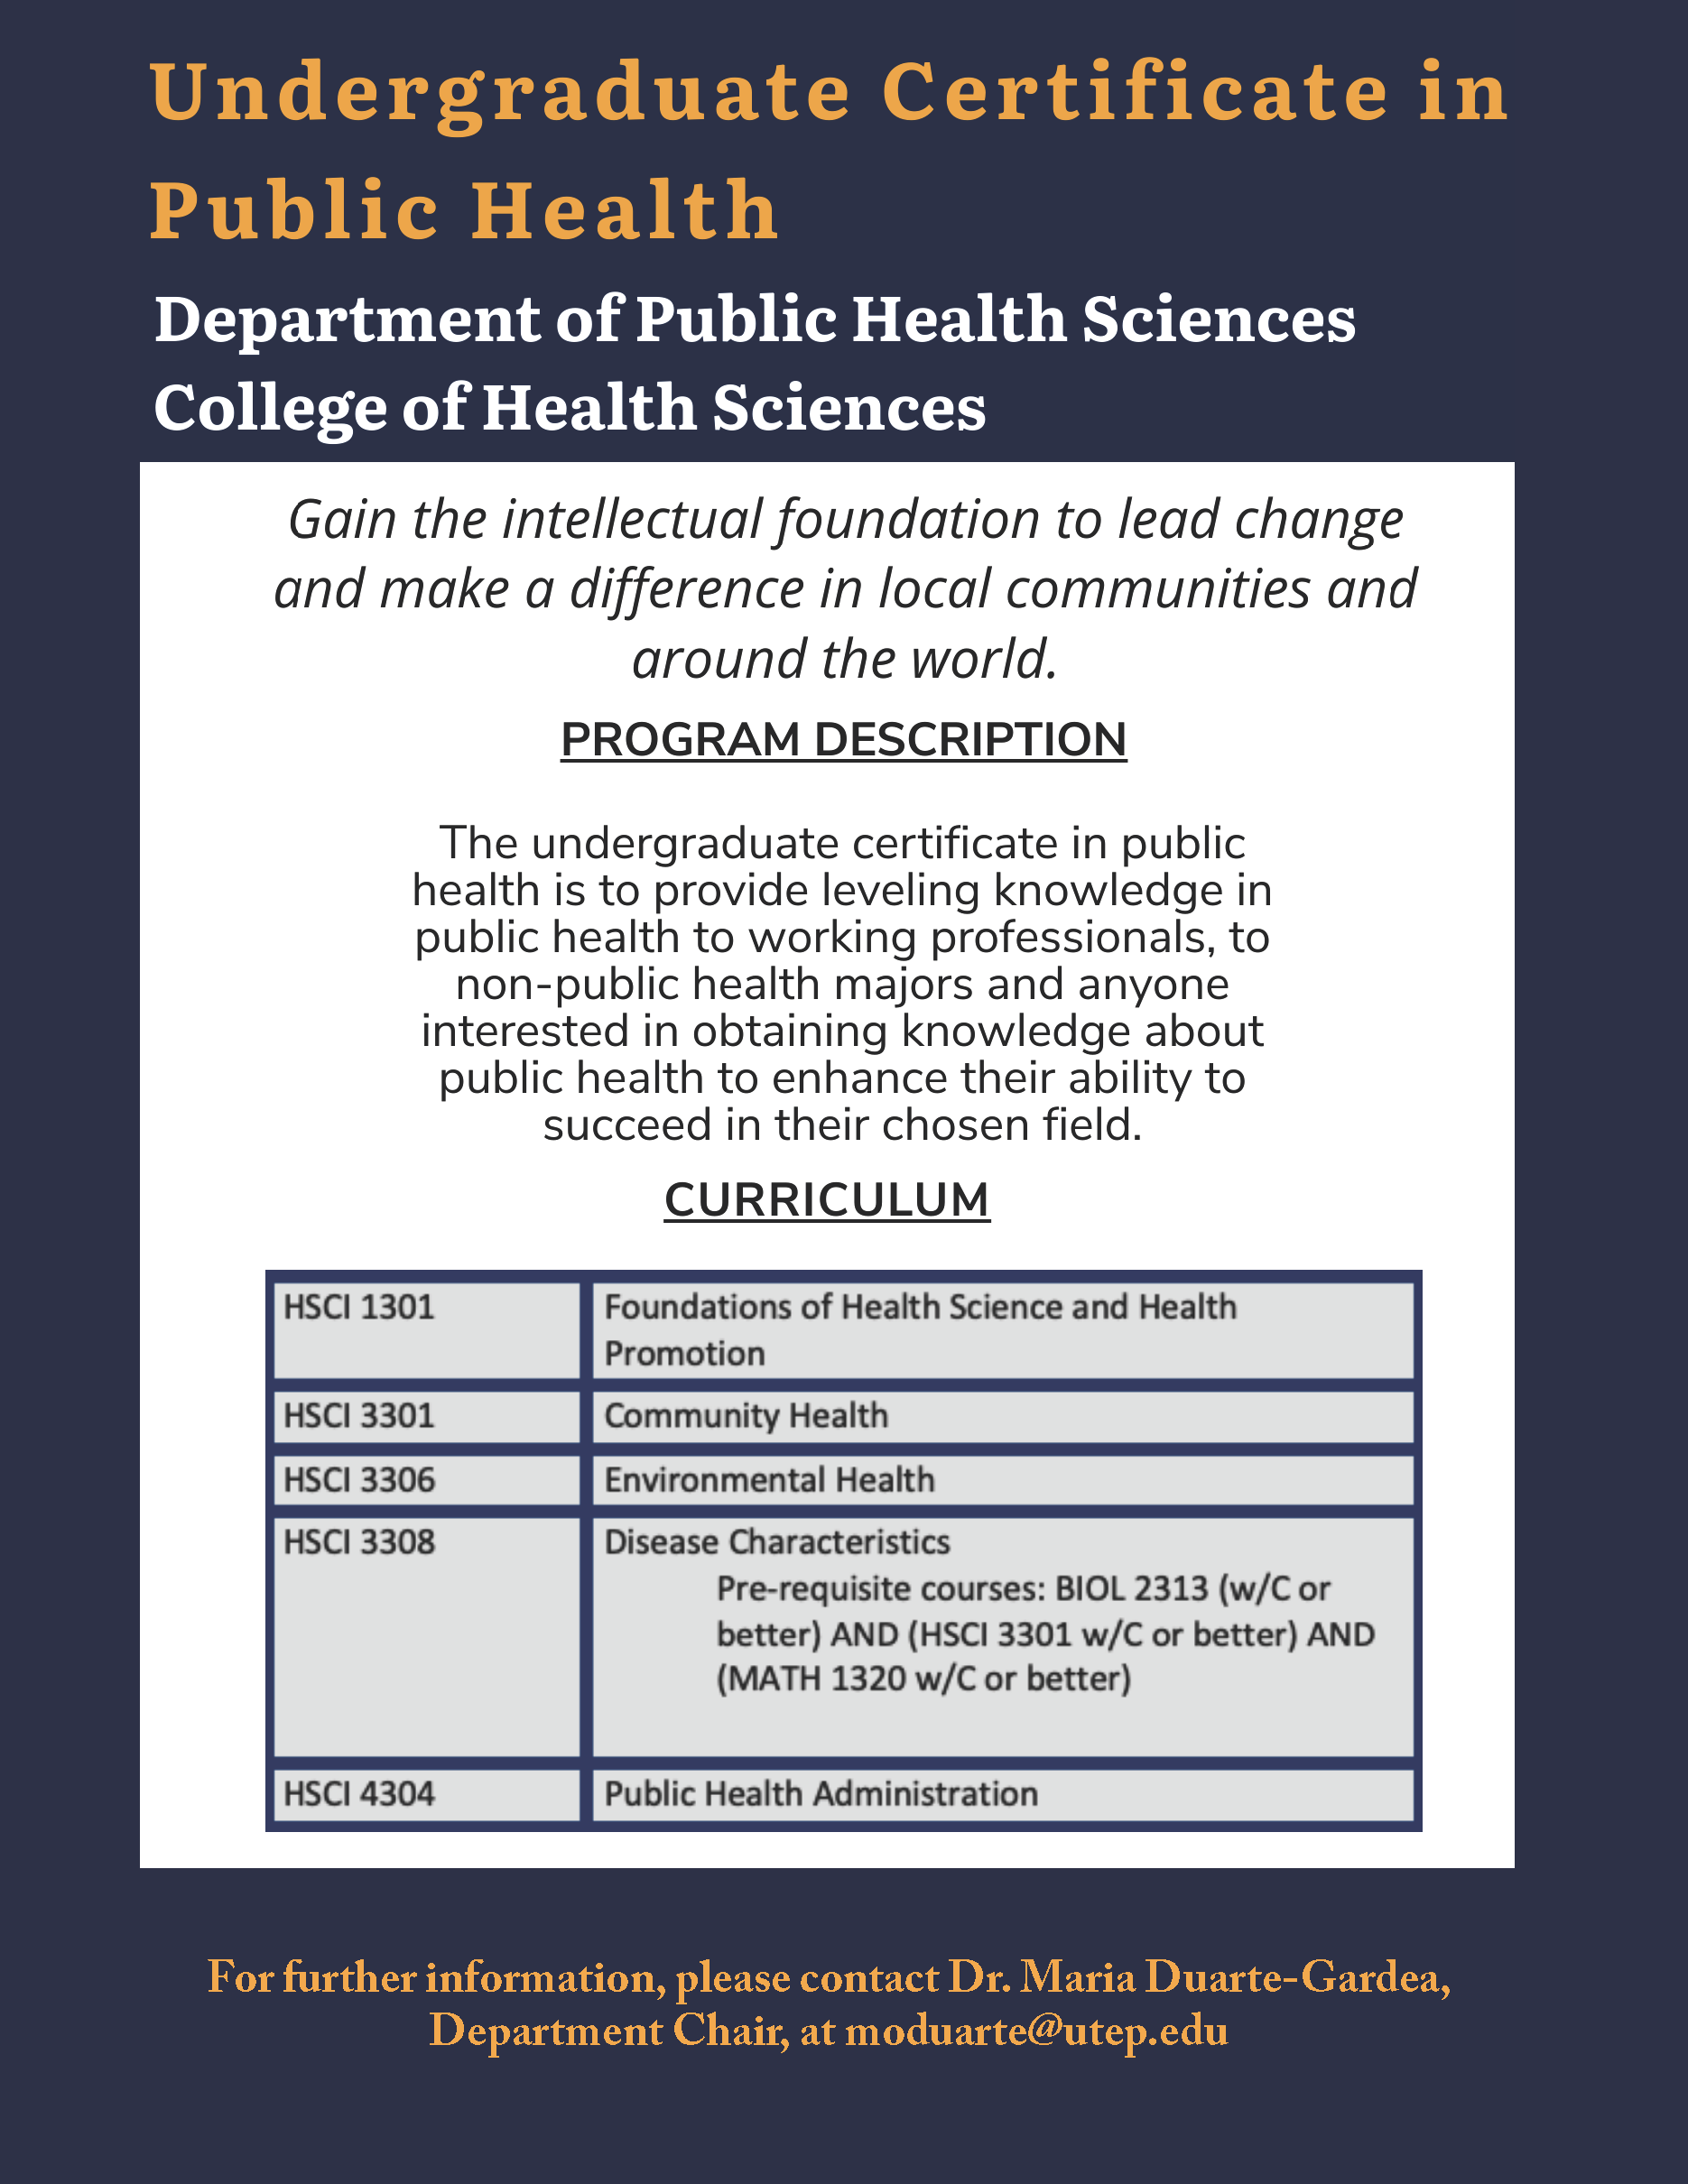 UG-Certificate-in-PHealth-Flyer.png